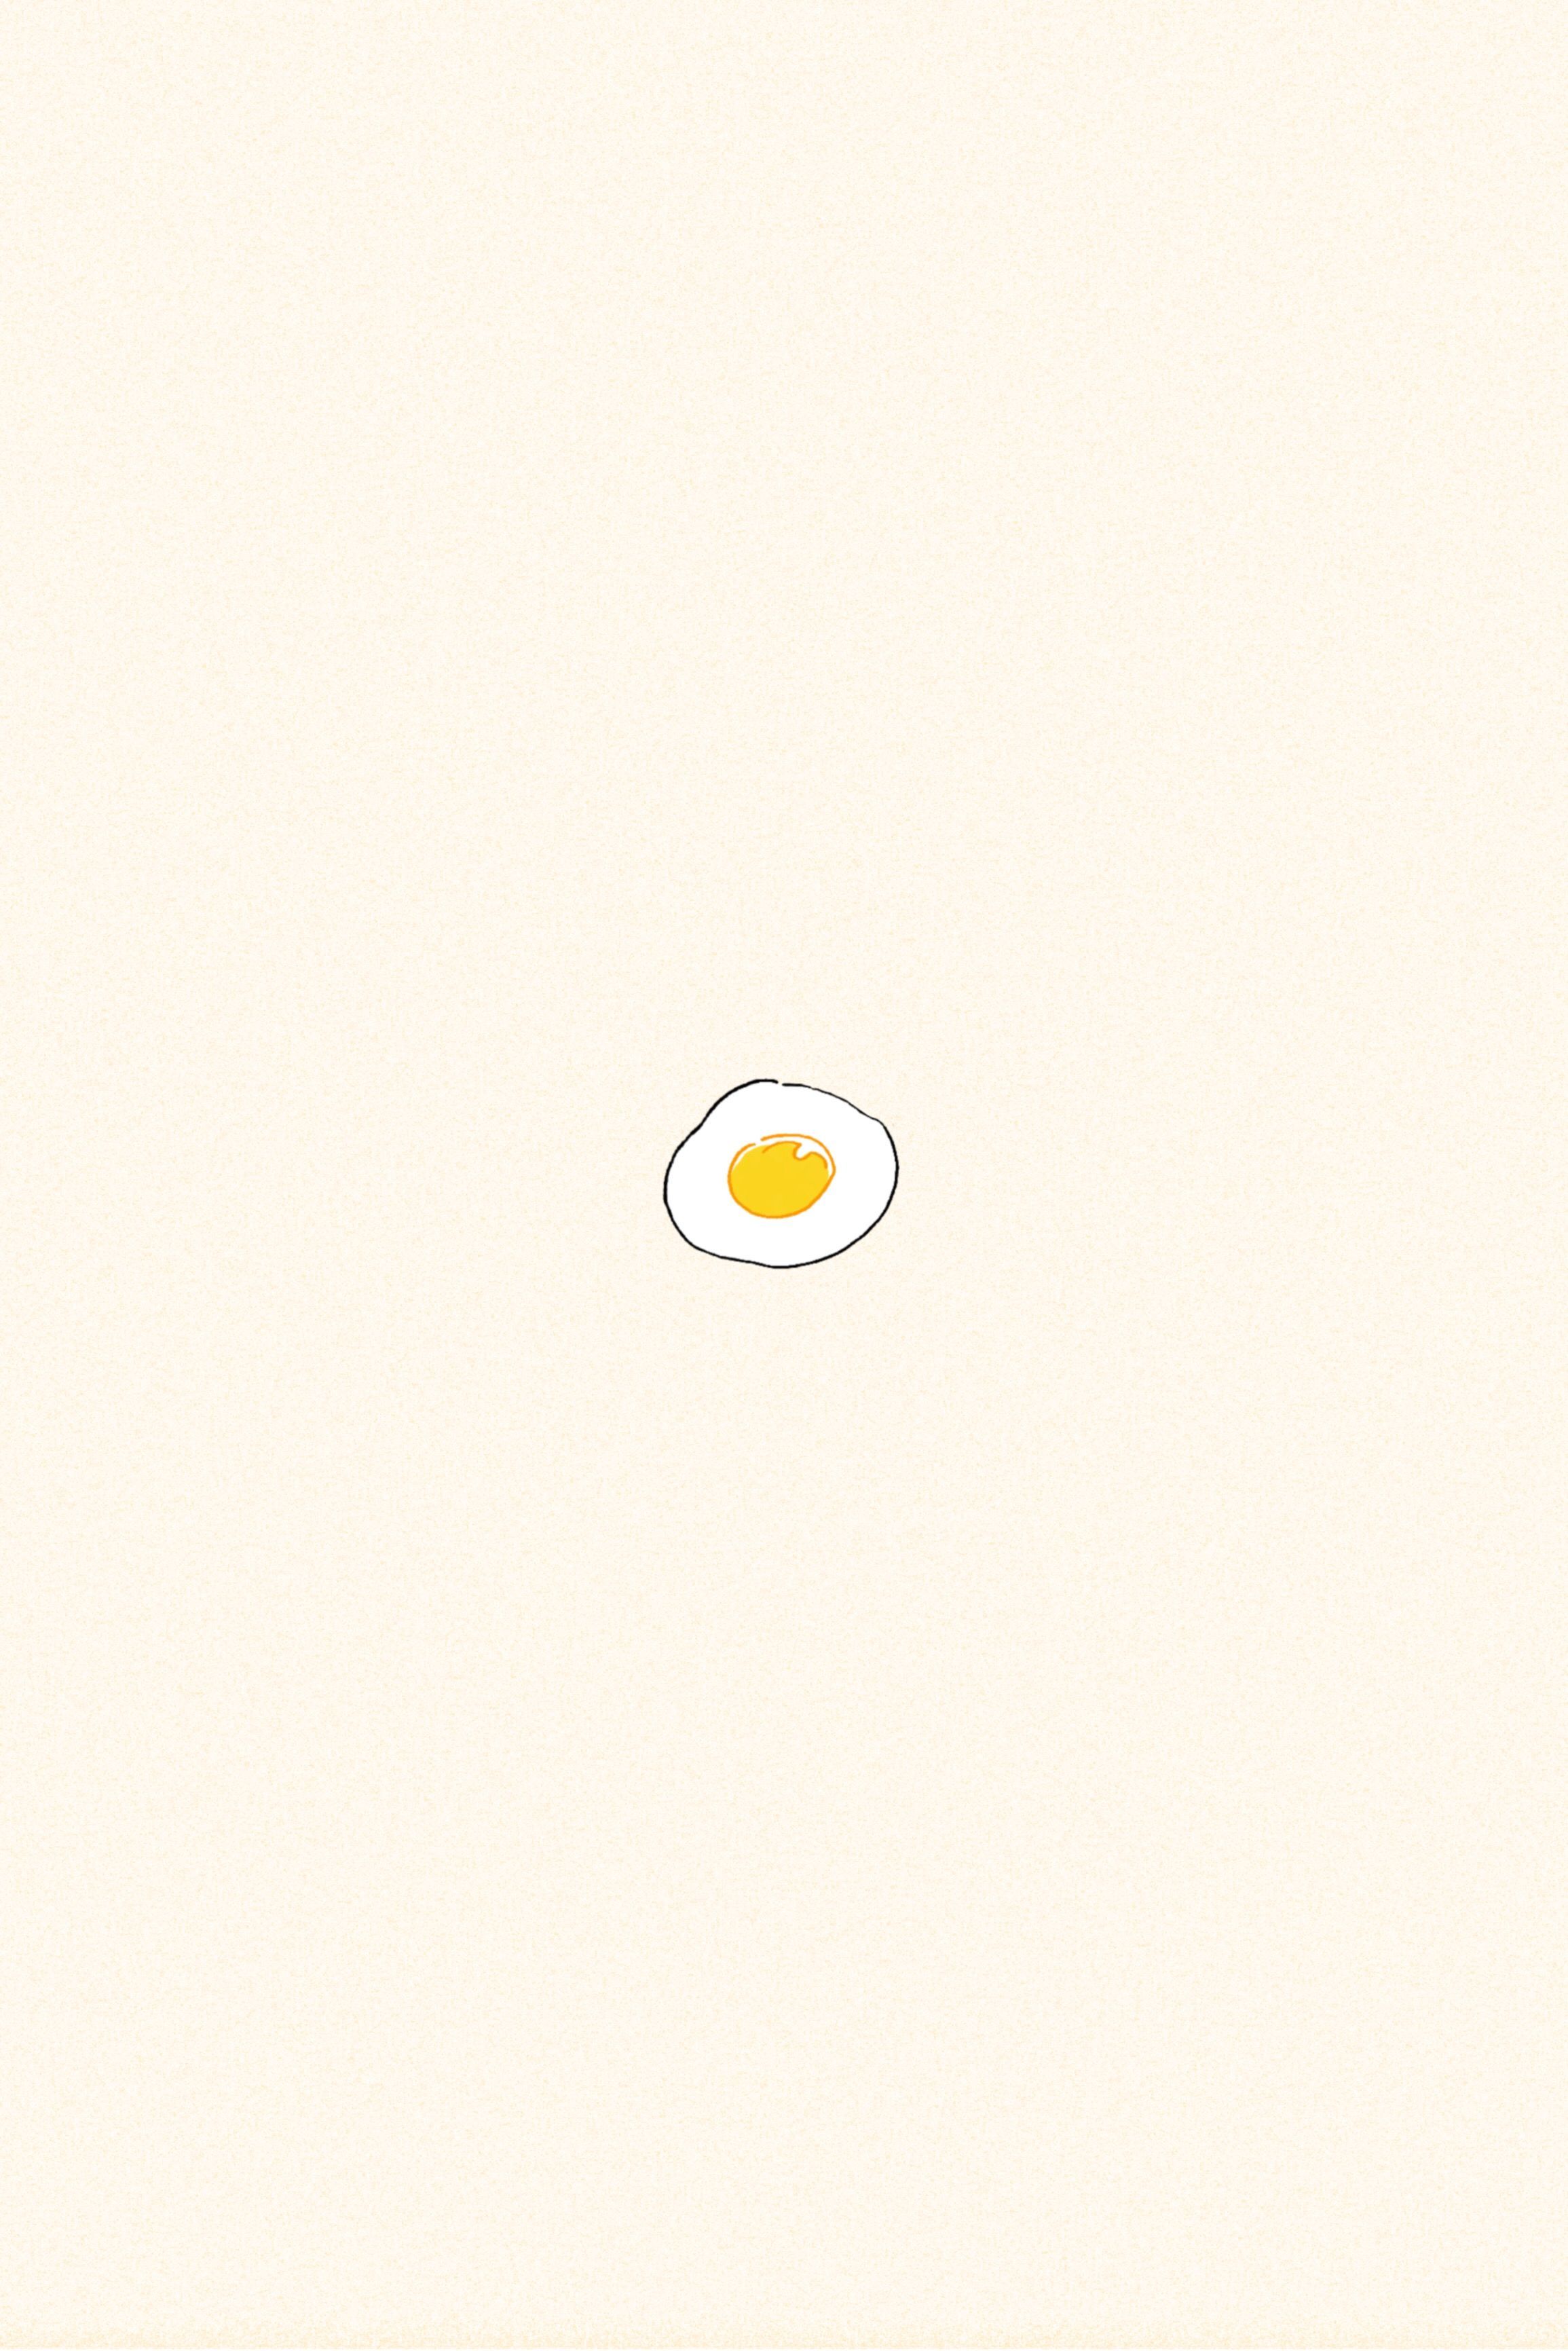 A single egg yolk is drawn on a yellow background. - Egg